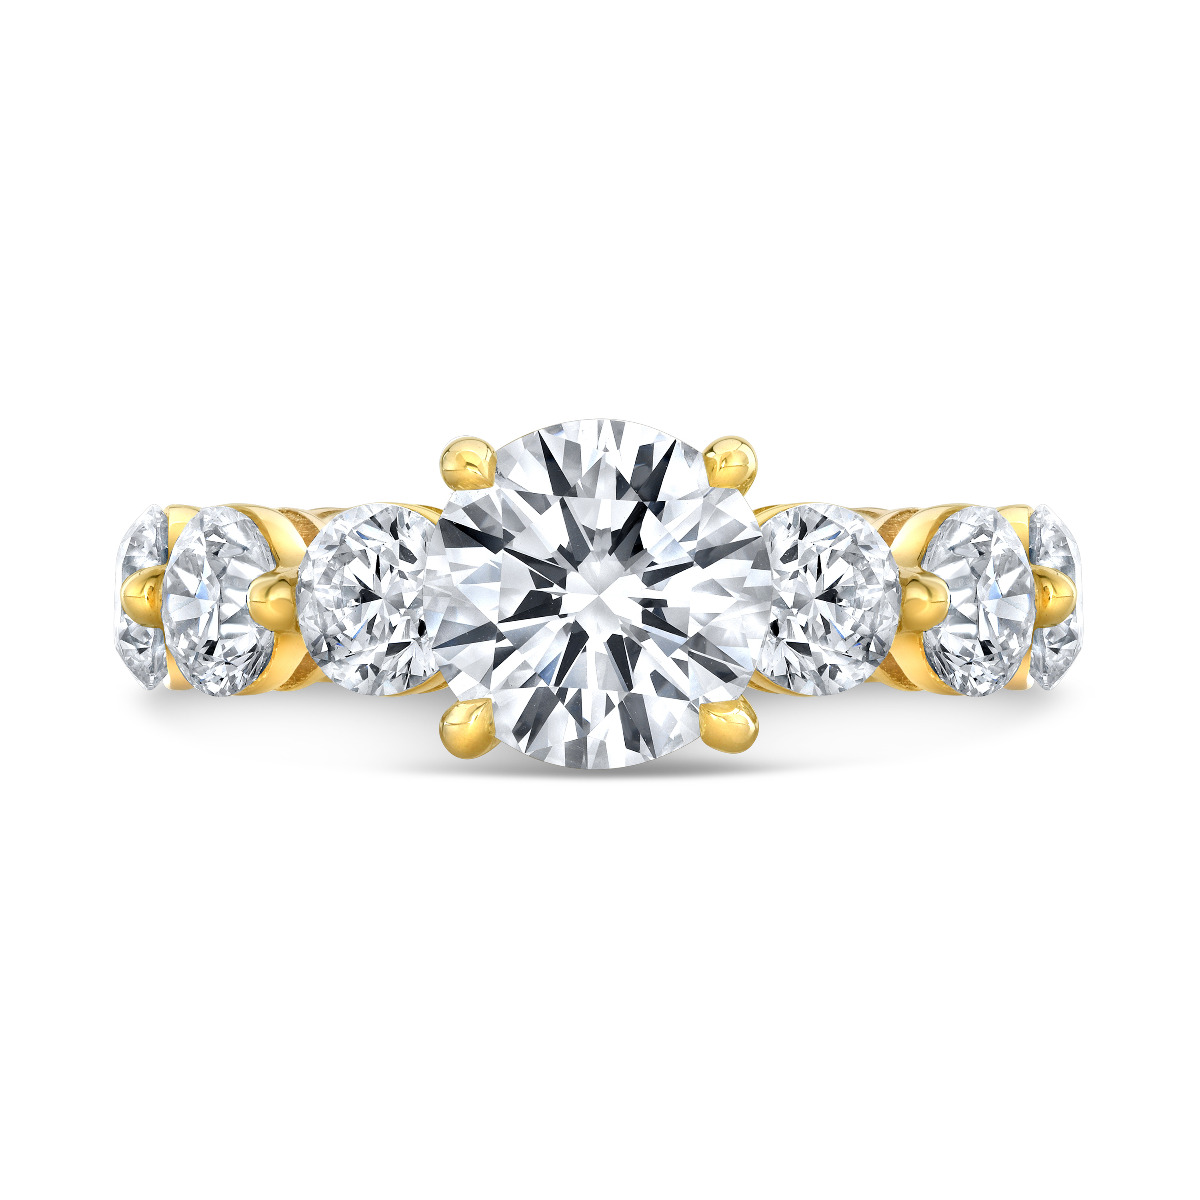 Natural round diamonds eternity engagement ring in yellow gold.